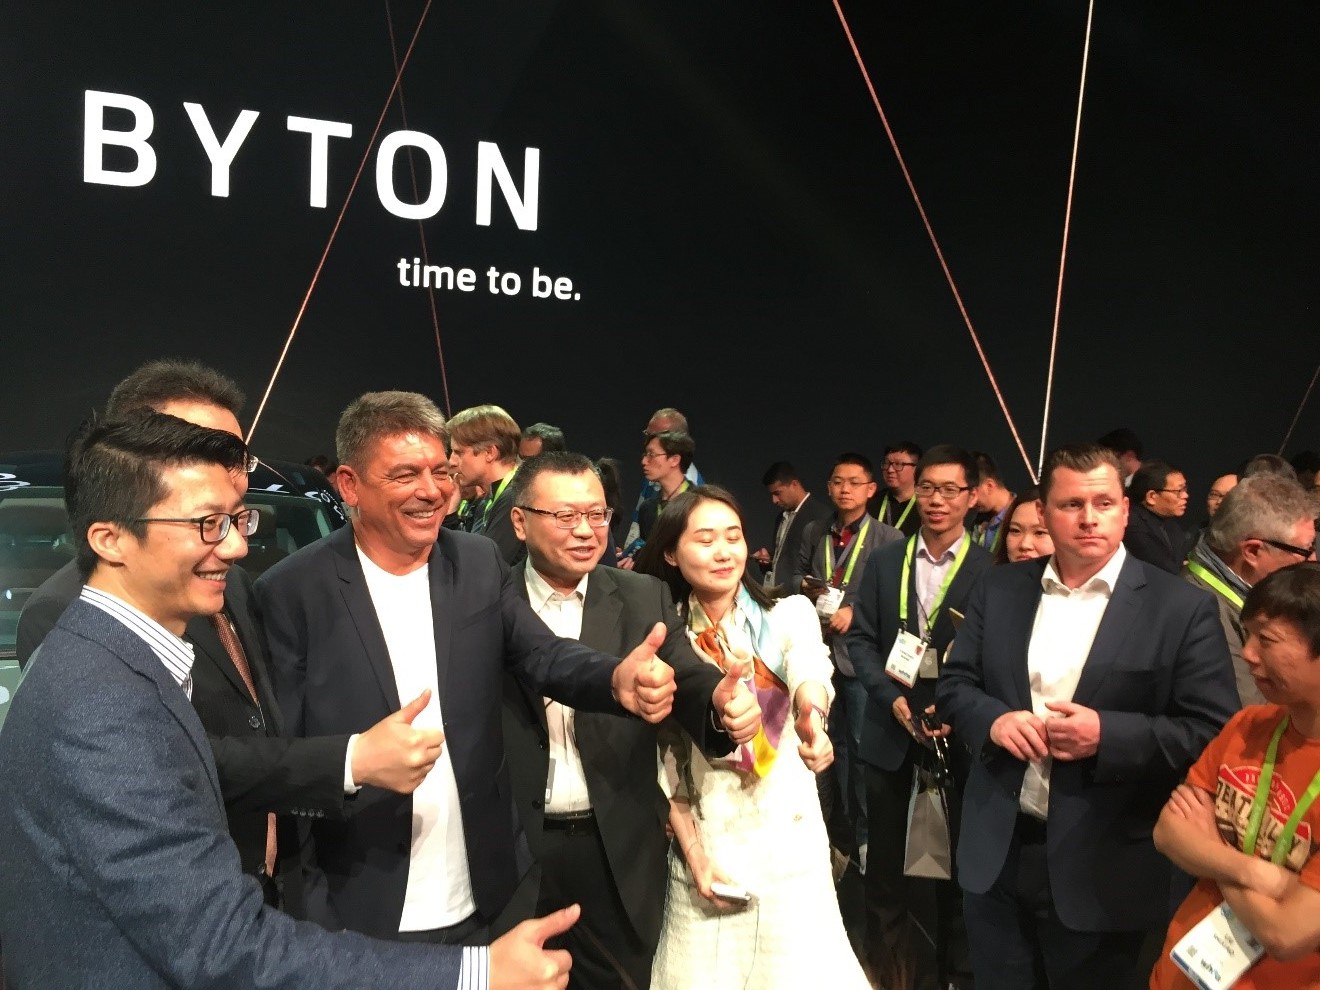 Dr. Carsten Breitfeld, CEO, Co-Founder and Chairman of the Board of Byton taking a picture with members of his team, including Ding Qingfen, Head of External Affairs, Public Relations and Government Affairs.